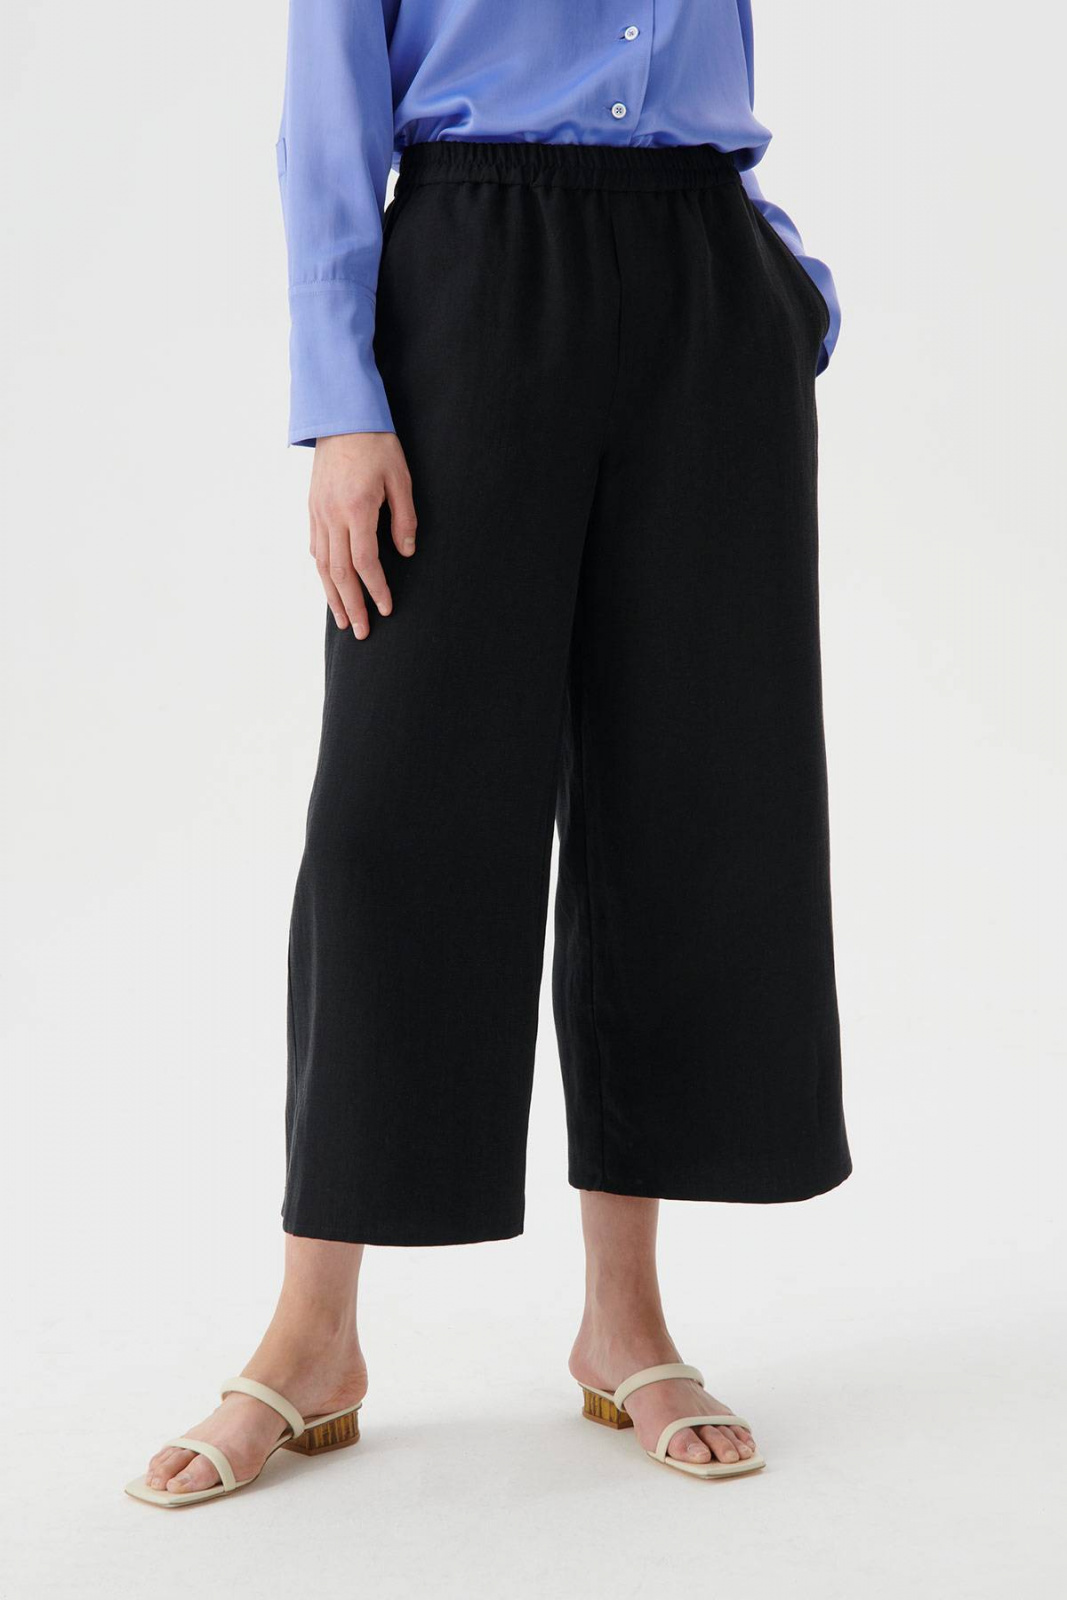 Aly New Rayon Trousers Trousers, jeans Elementy